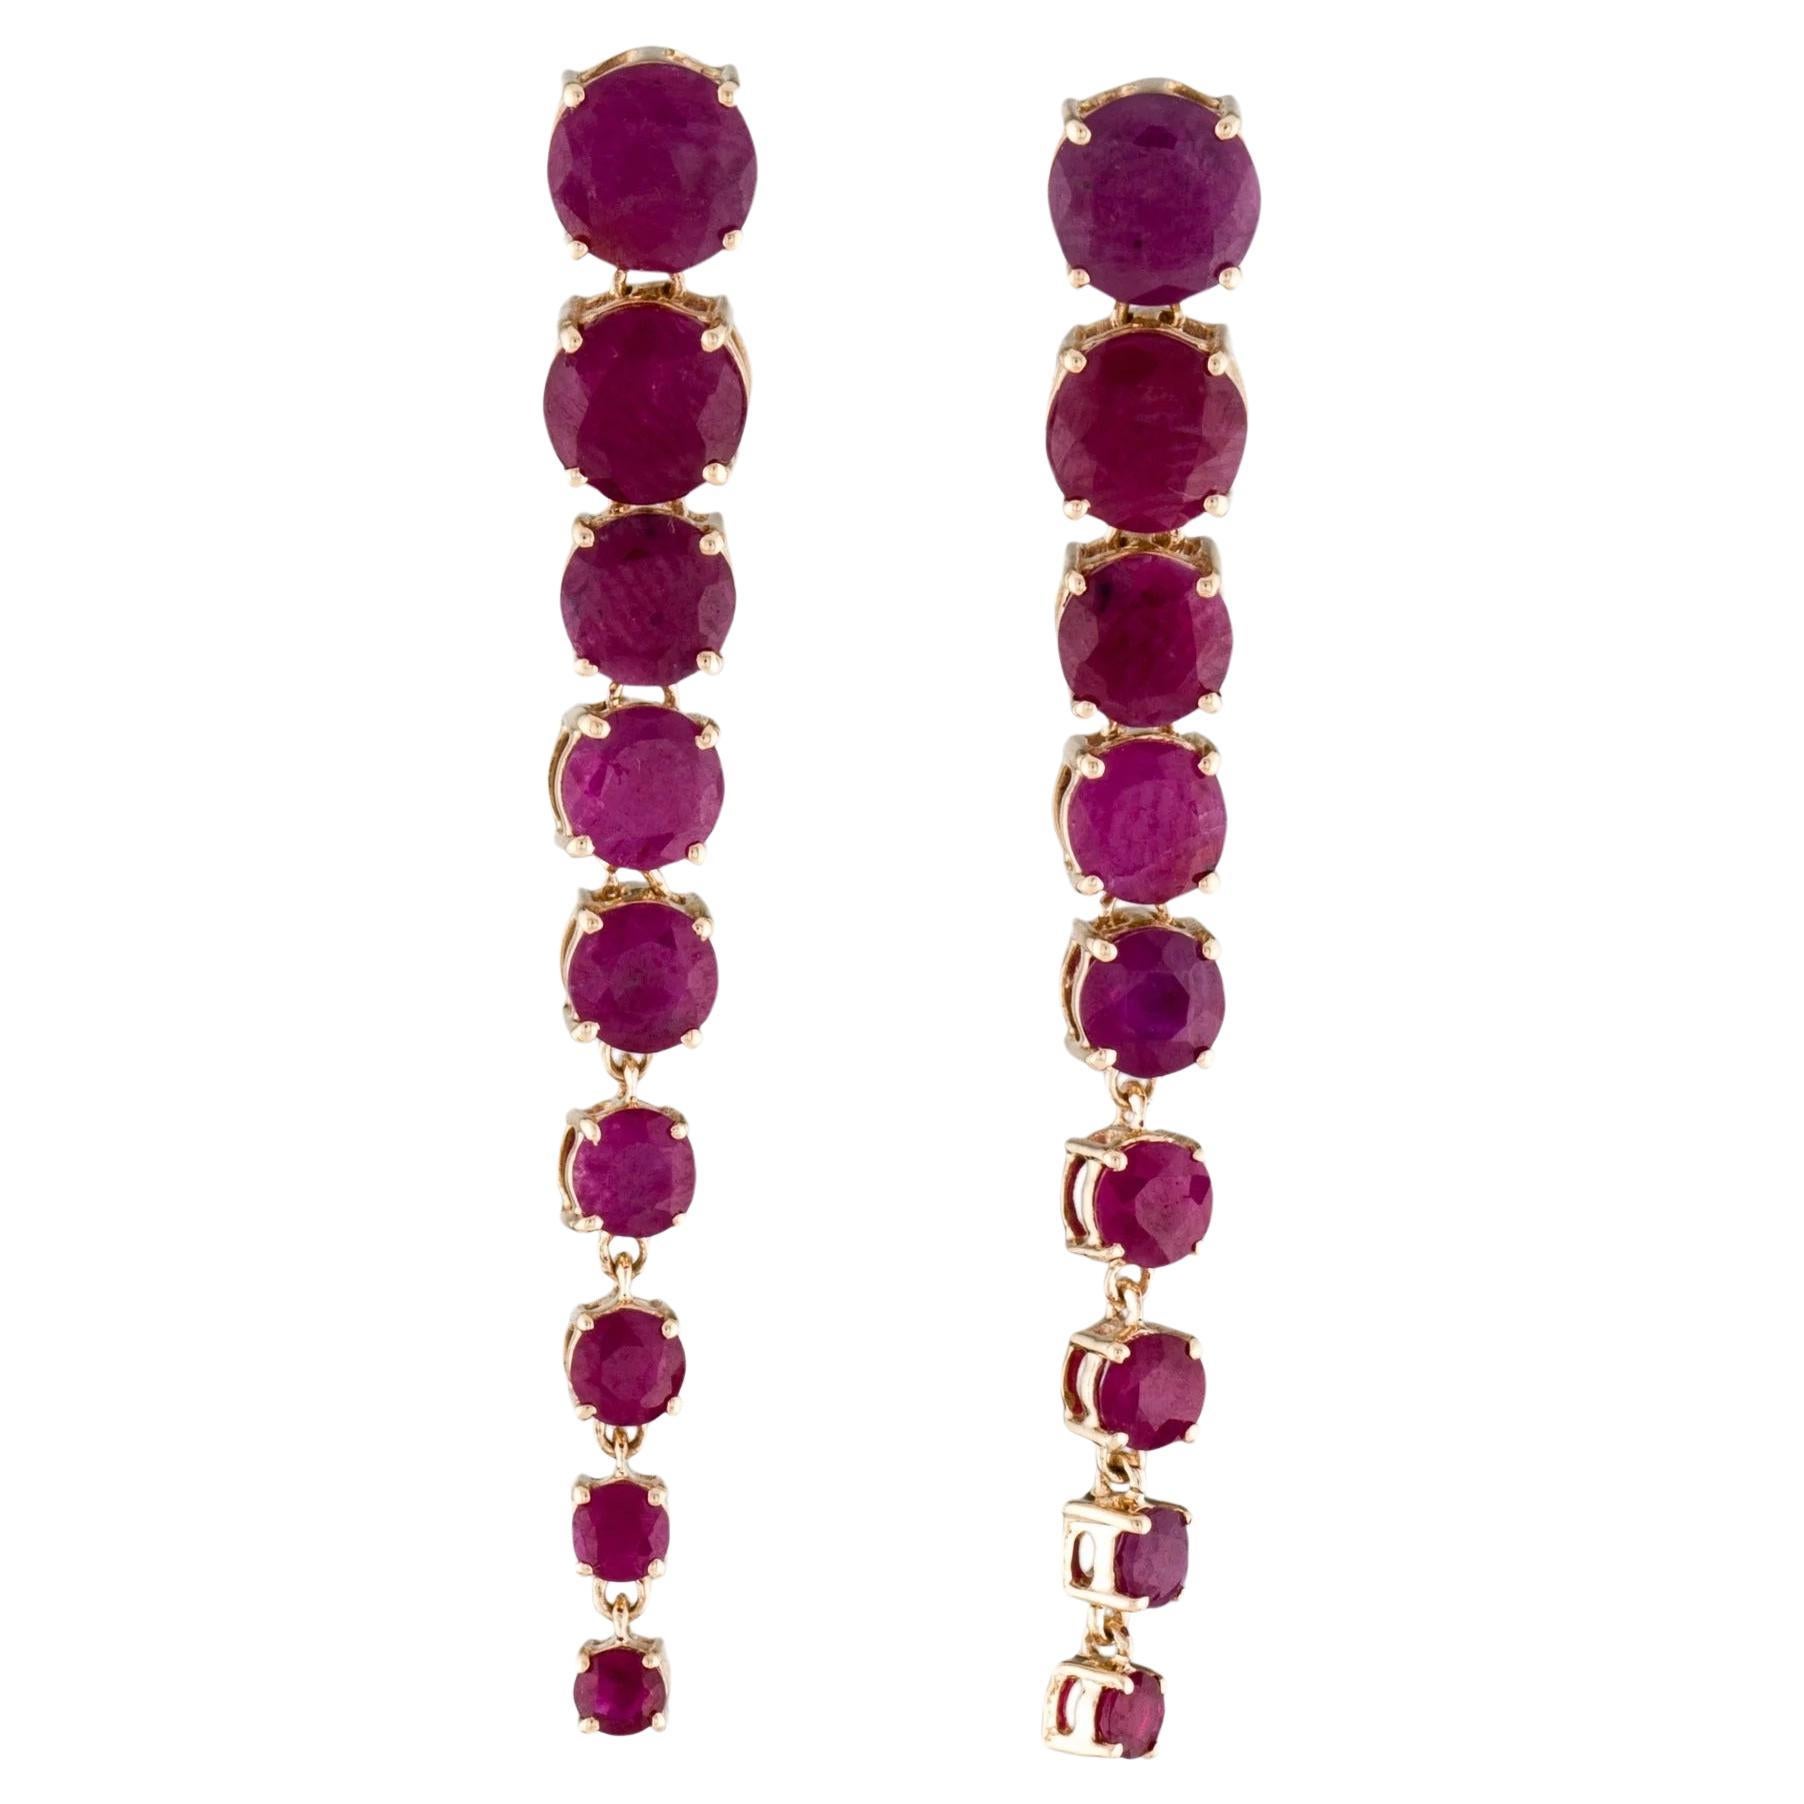 Stylish 14K Yellow Gold Earrings with 6.45 Carat Round Modified Brilliant Ruby For Sale